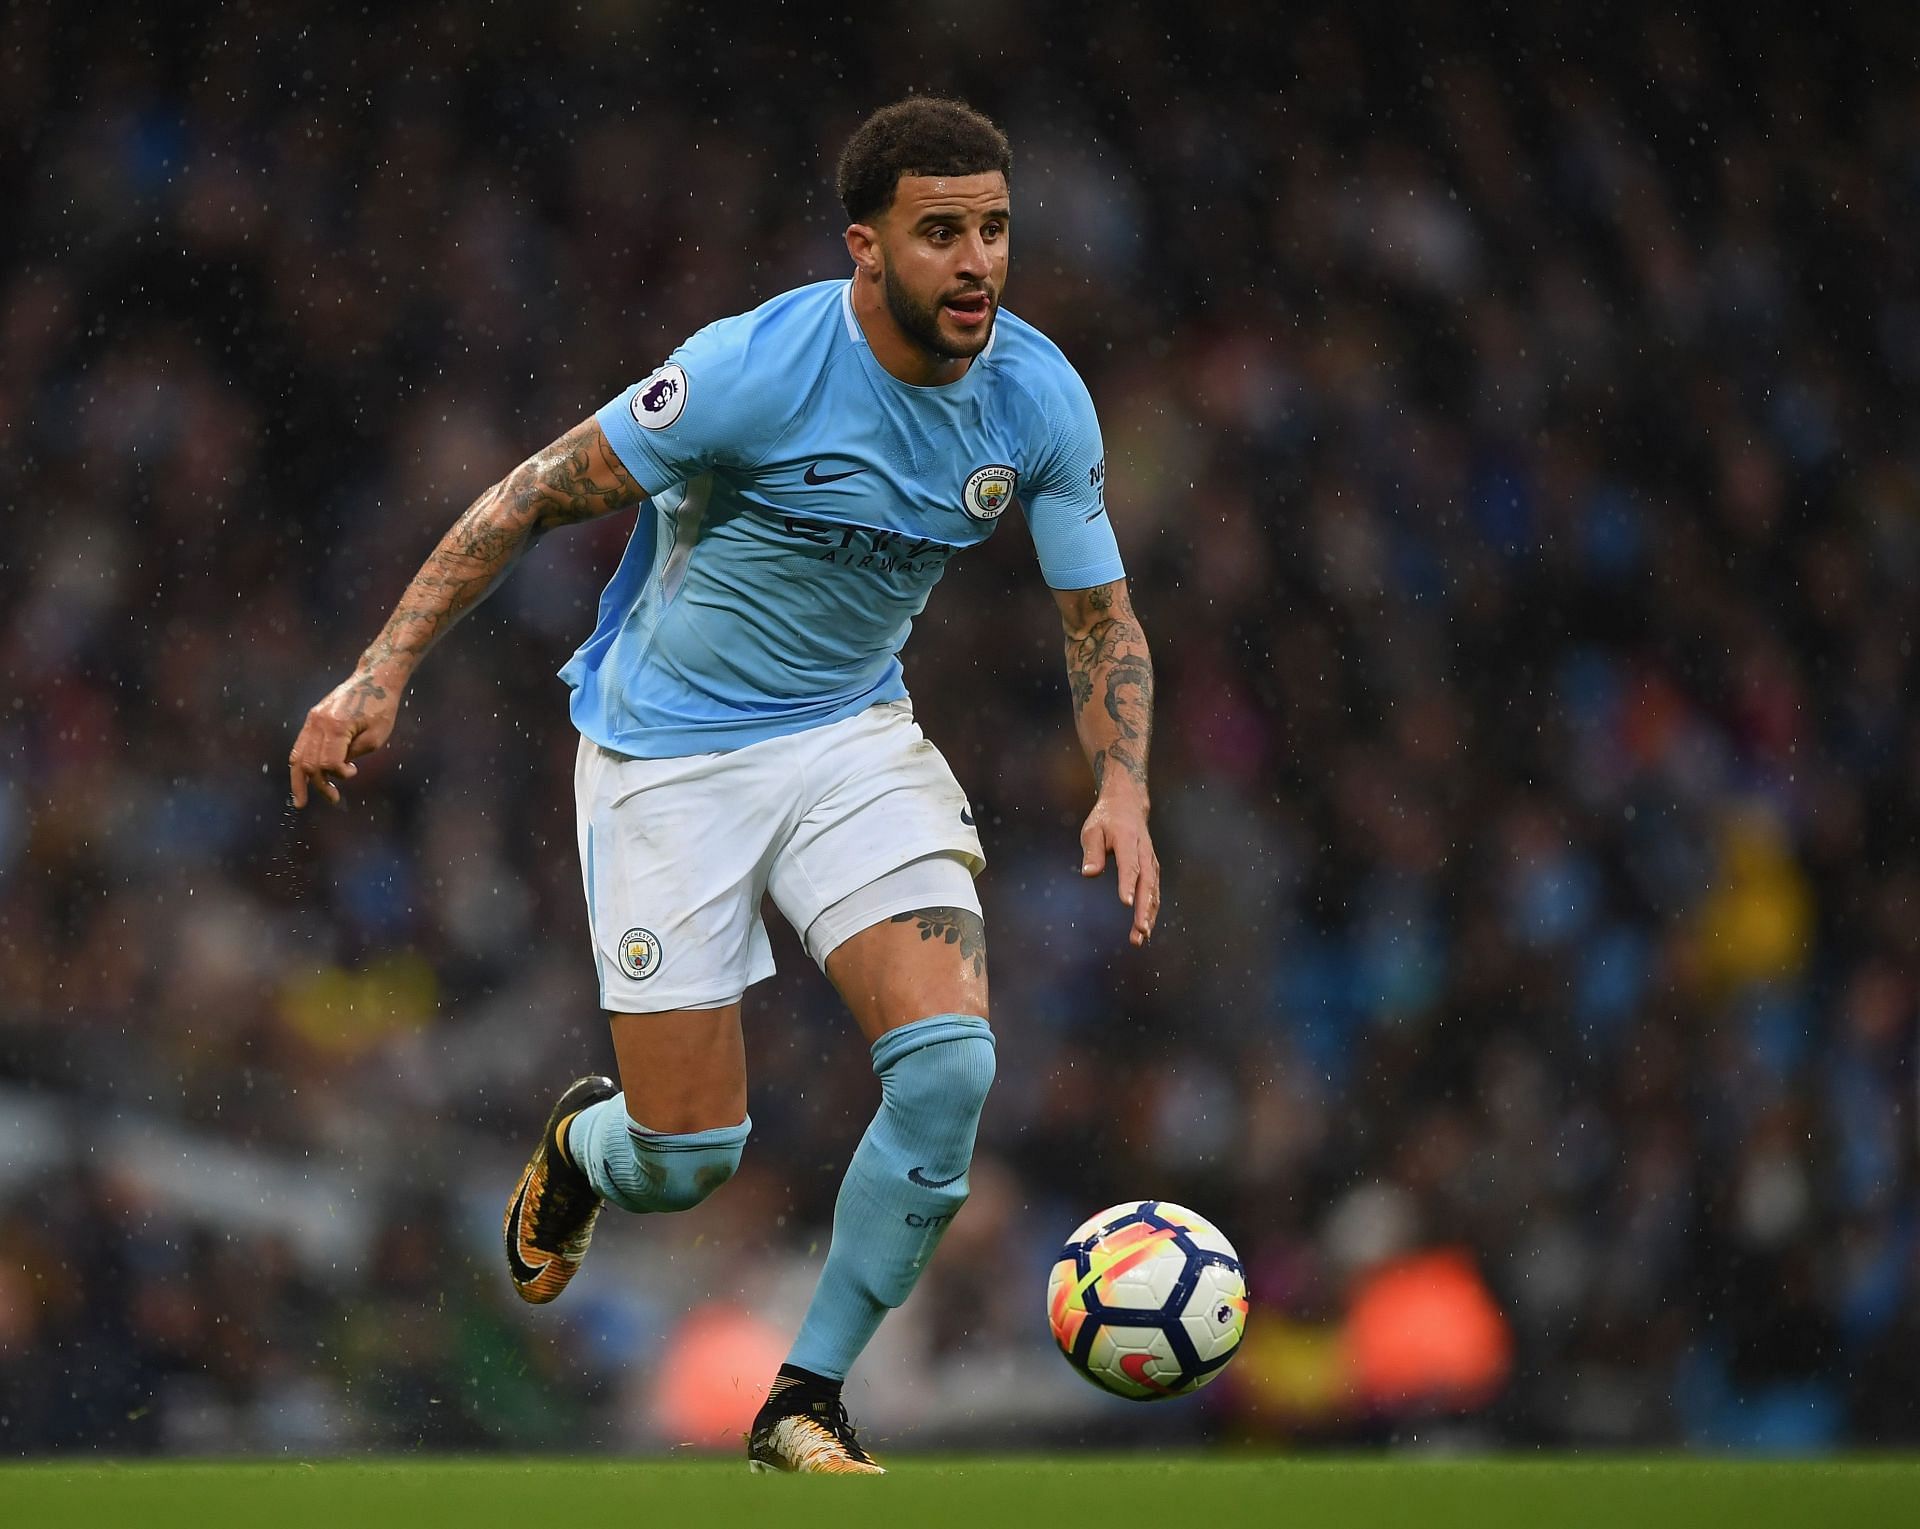 31-year old Kyle Walker seems to be getting better with age.